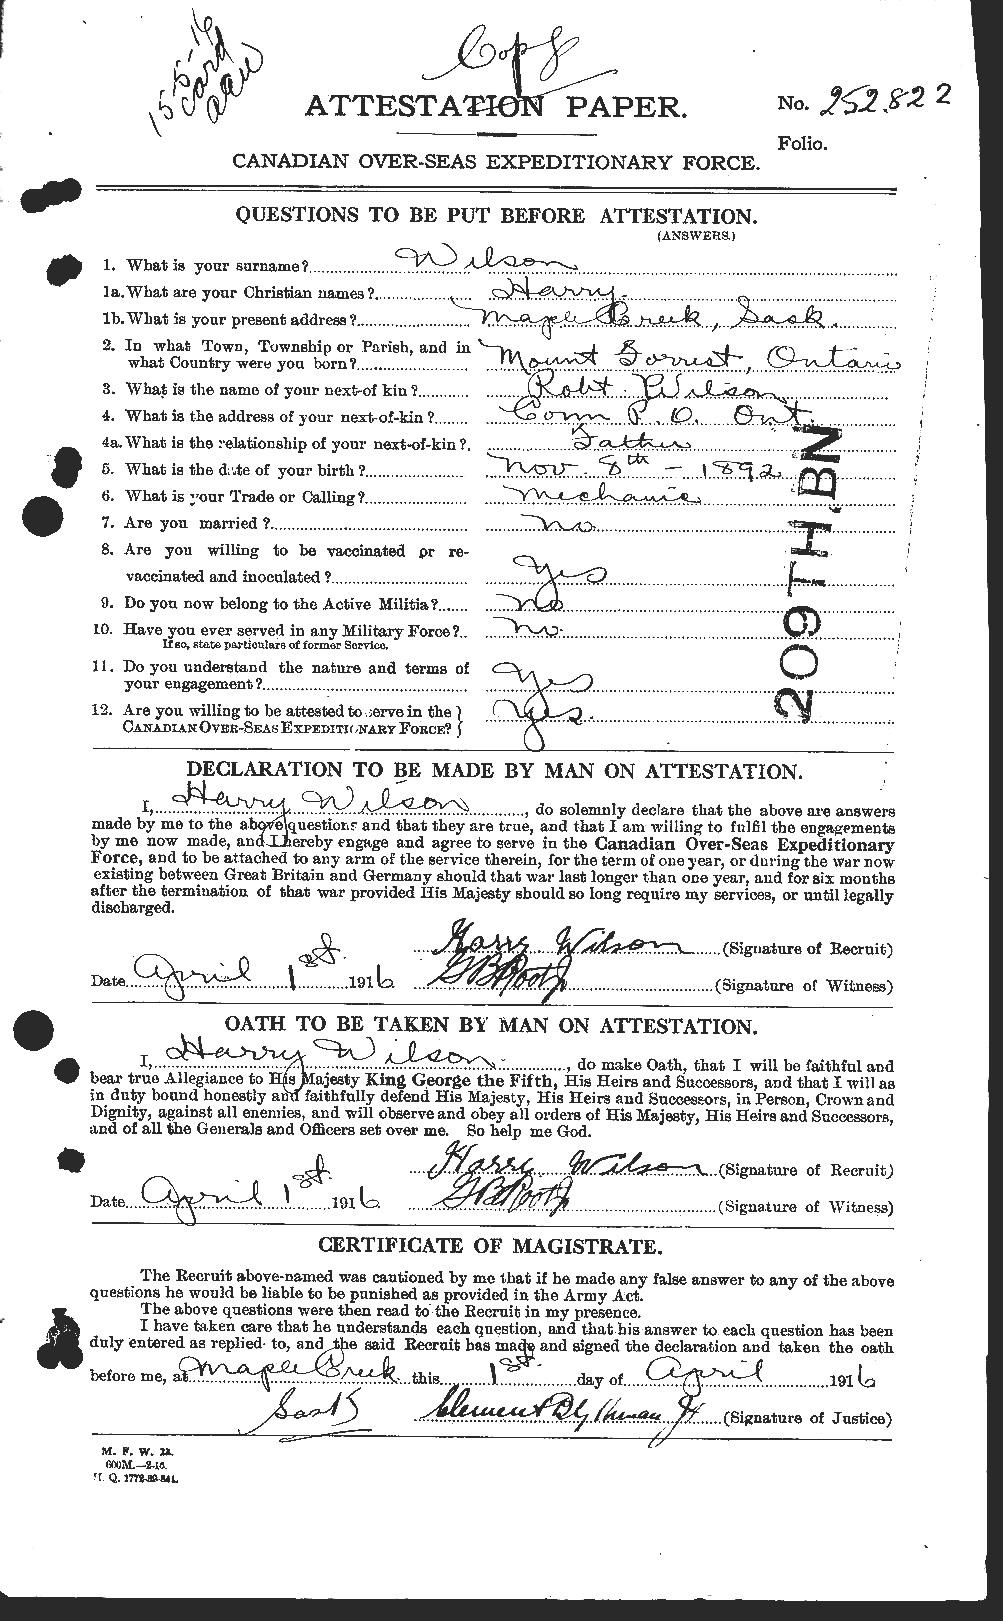 Personnel Records of the First World War - CEF 679431a